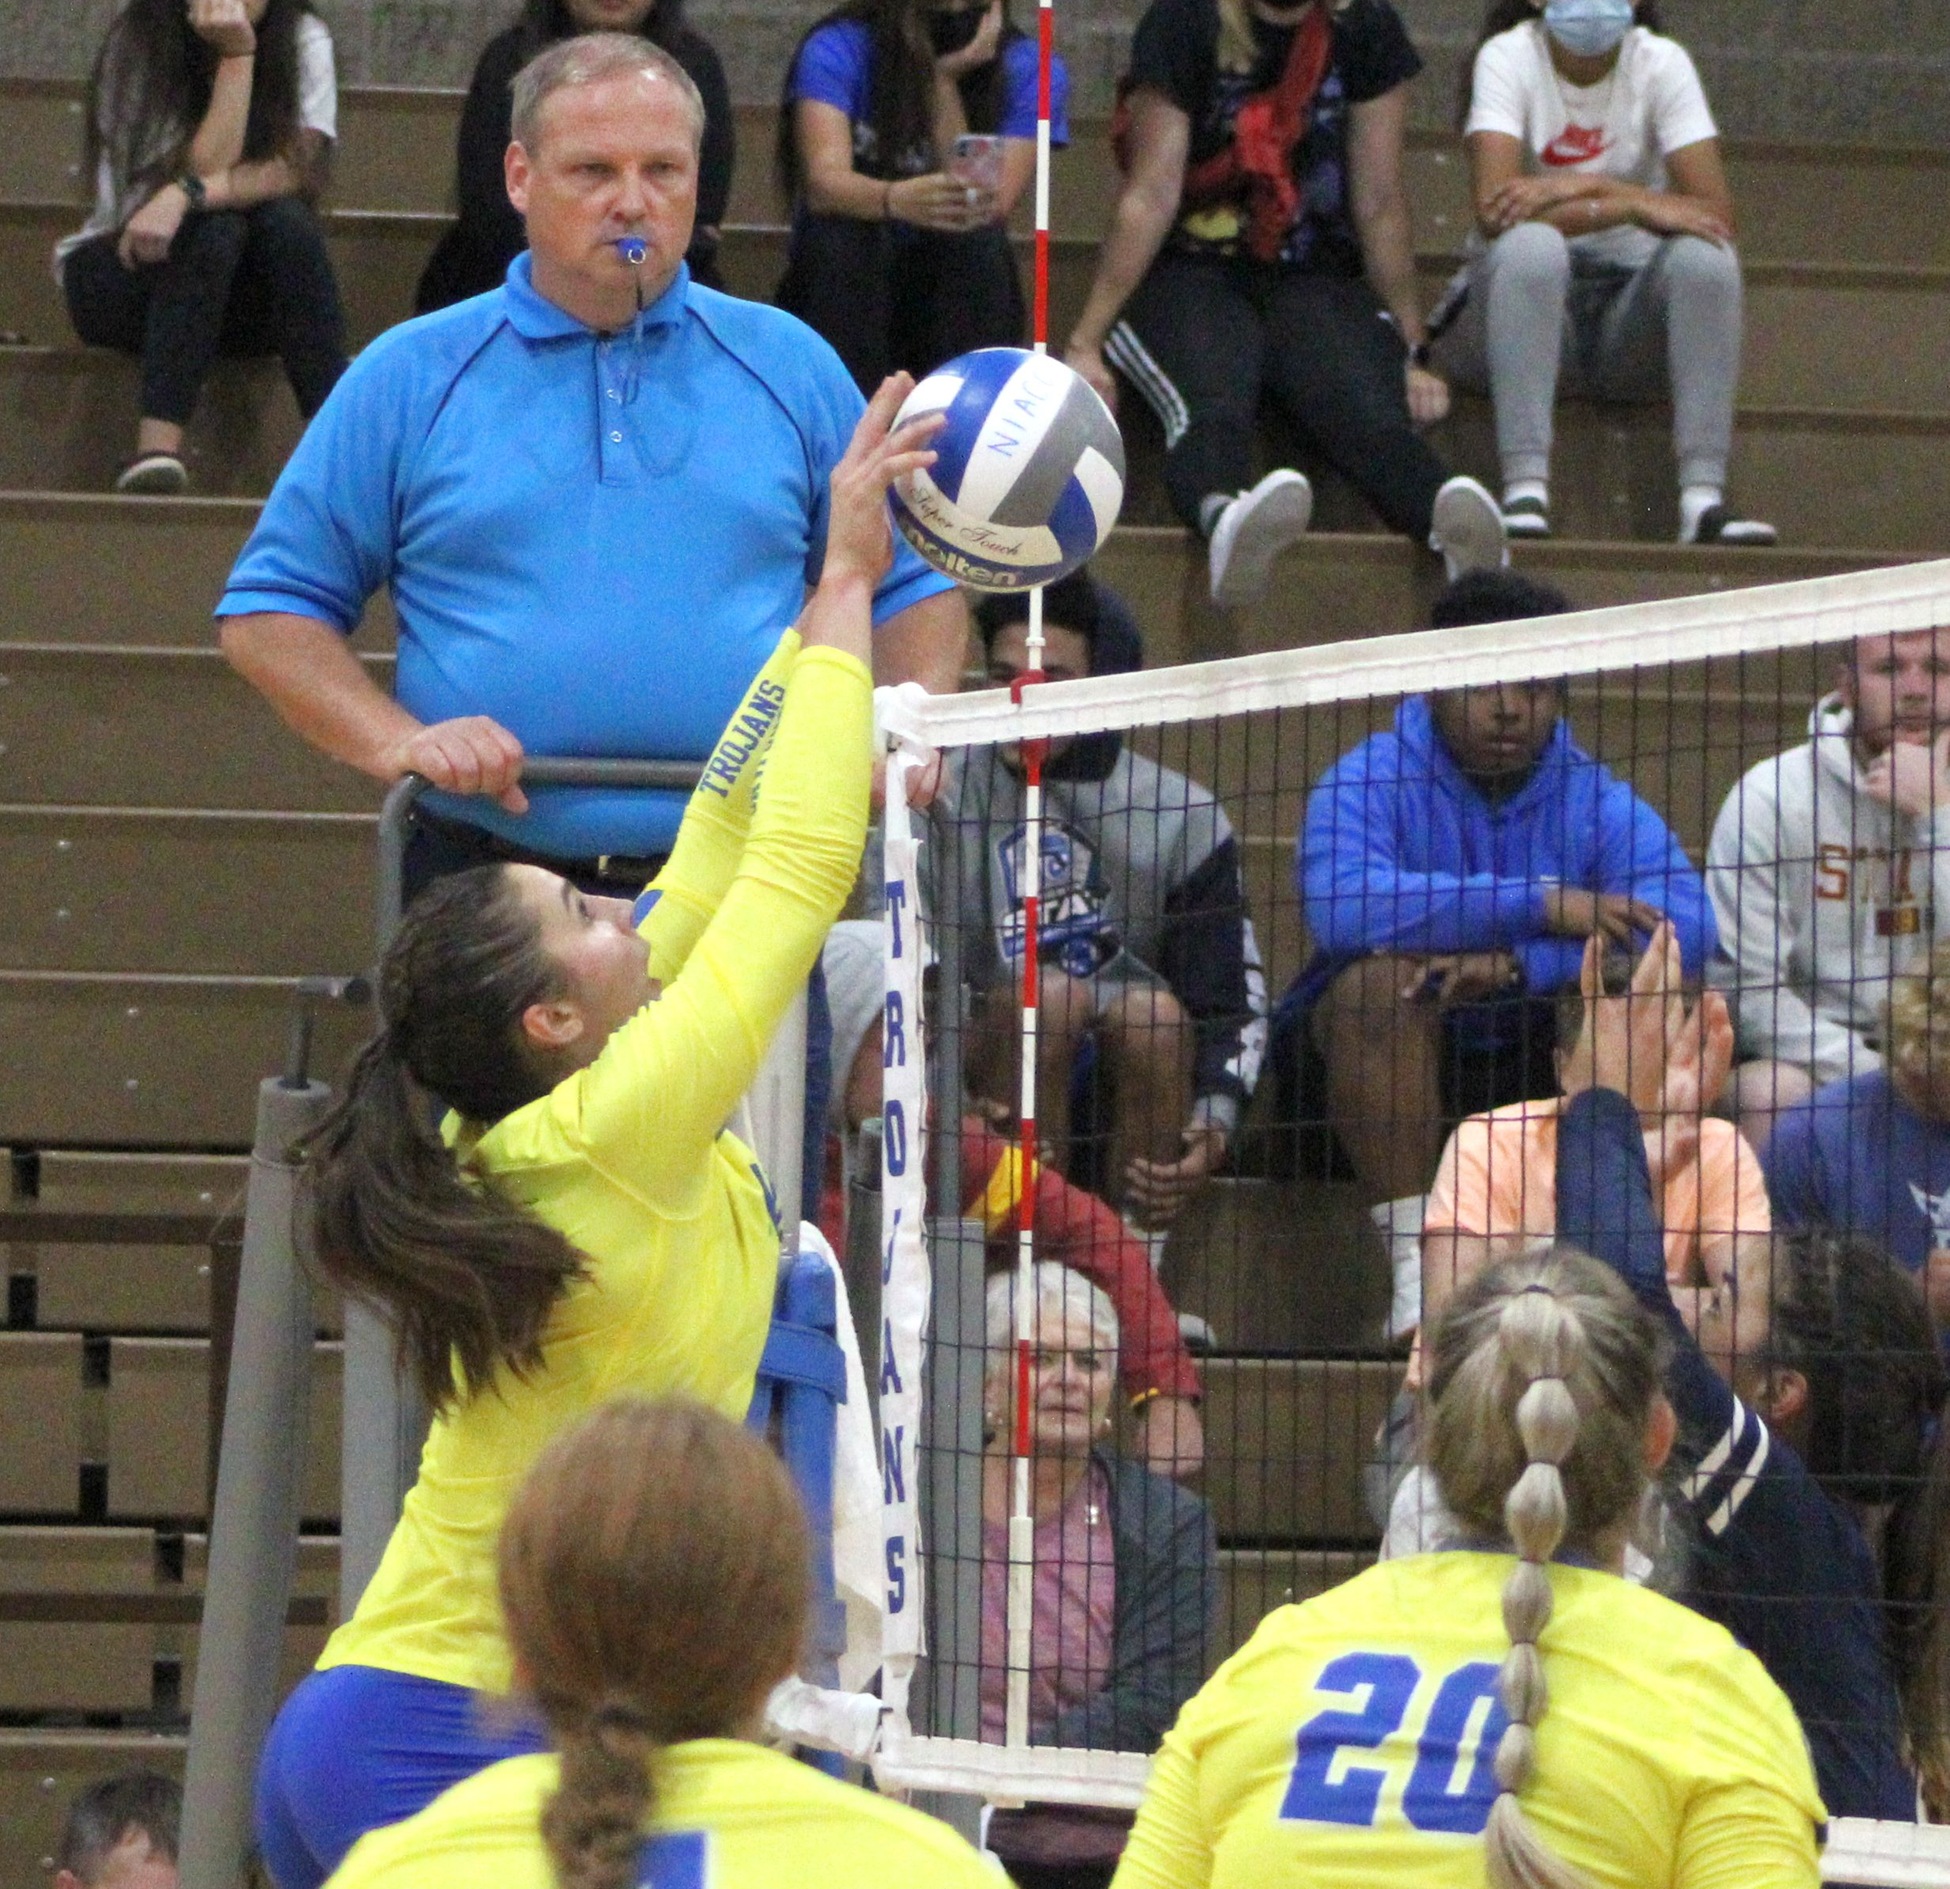 NIACC's Halsie Keltner battles at the net in Wednesday's ICCAC match against Southwestern in the NIACC gym.